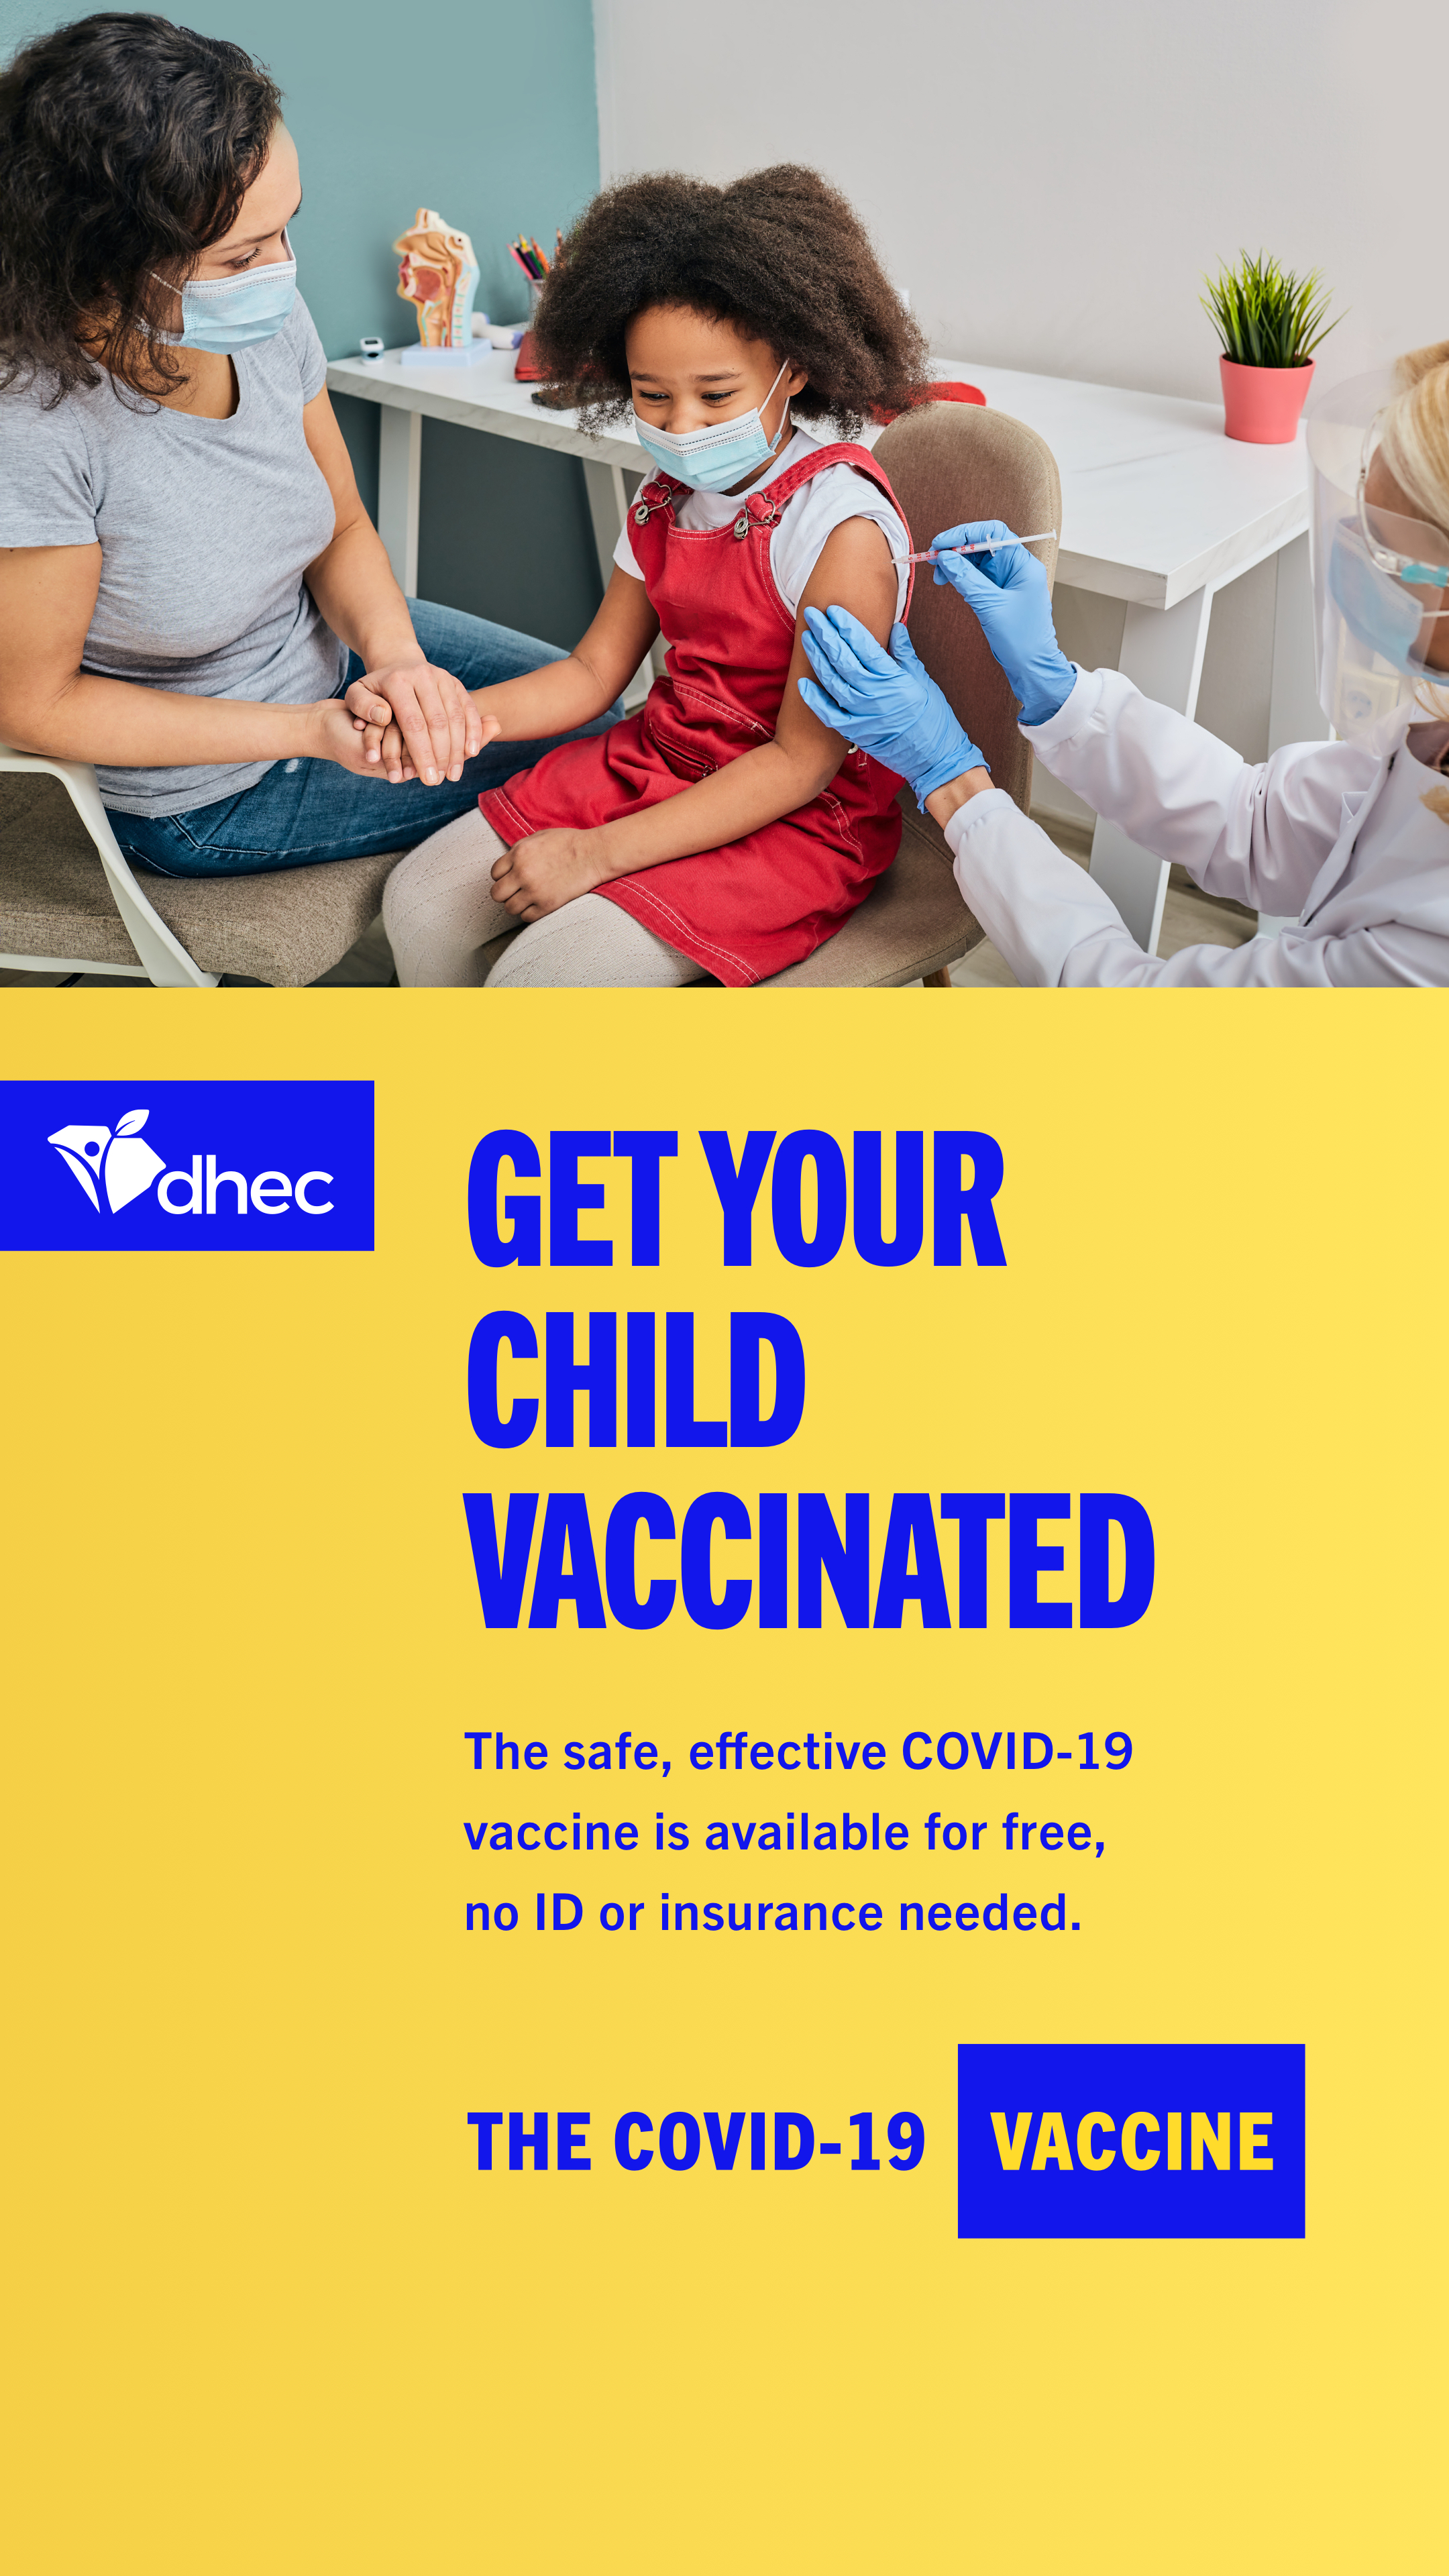 Get your child vaccinated